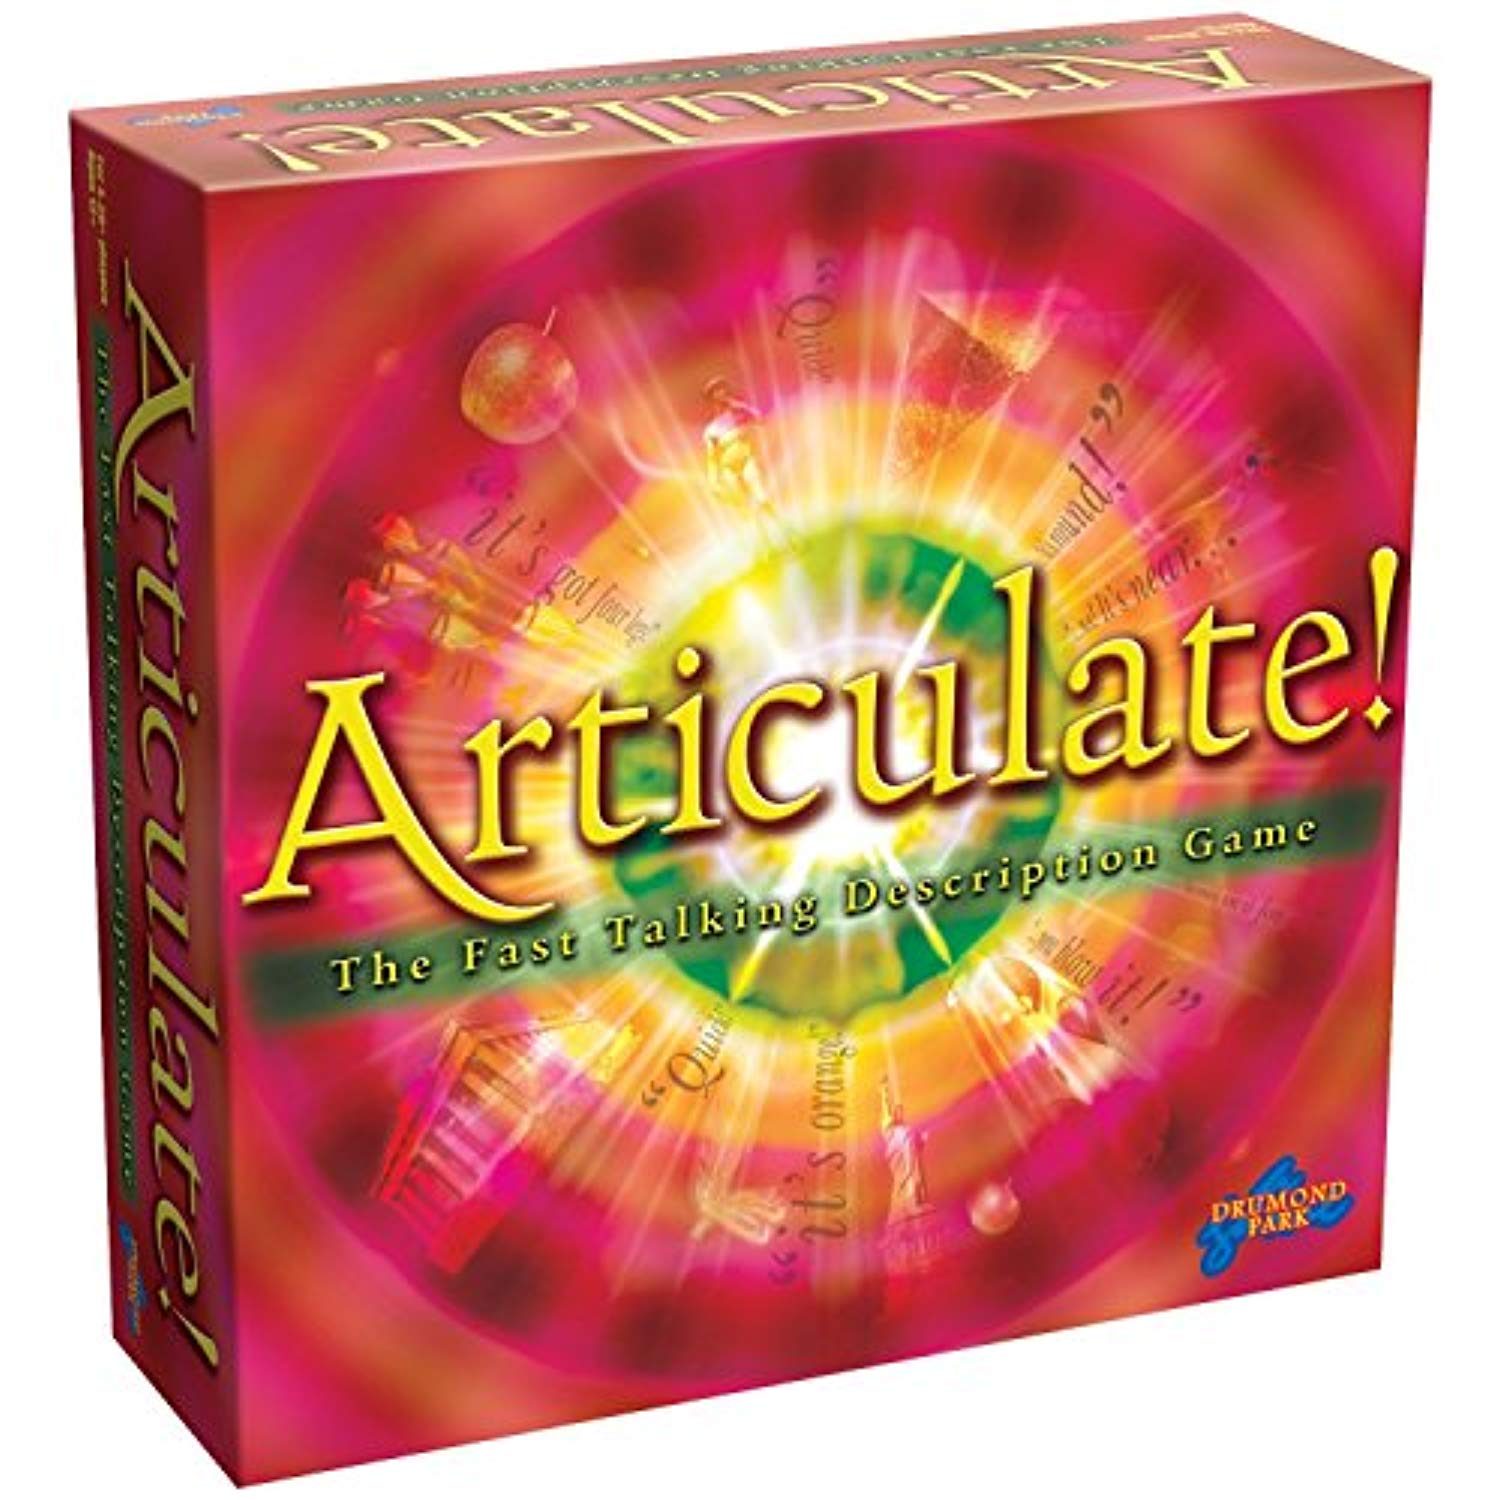 Drumond Park Articulate! Family Board Game - Offer Games